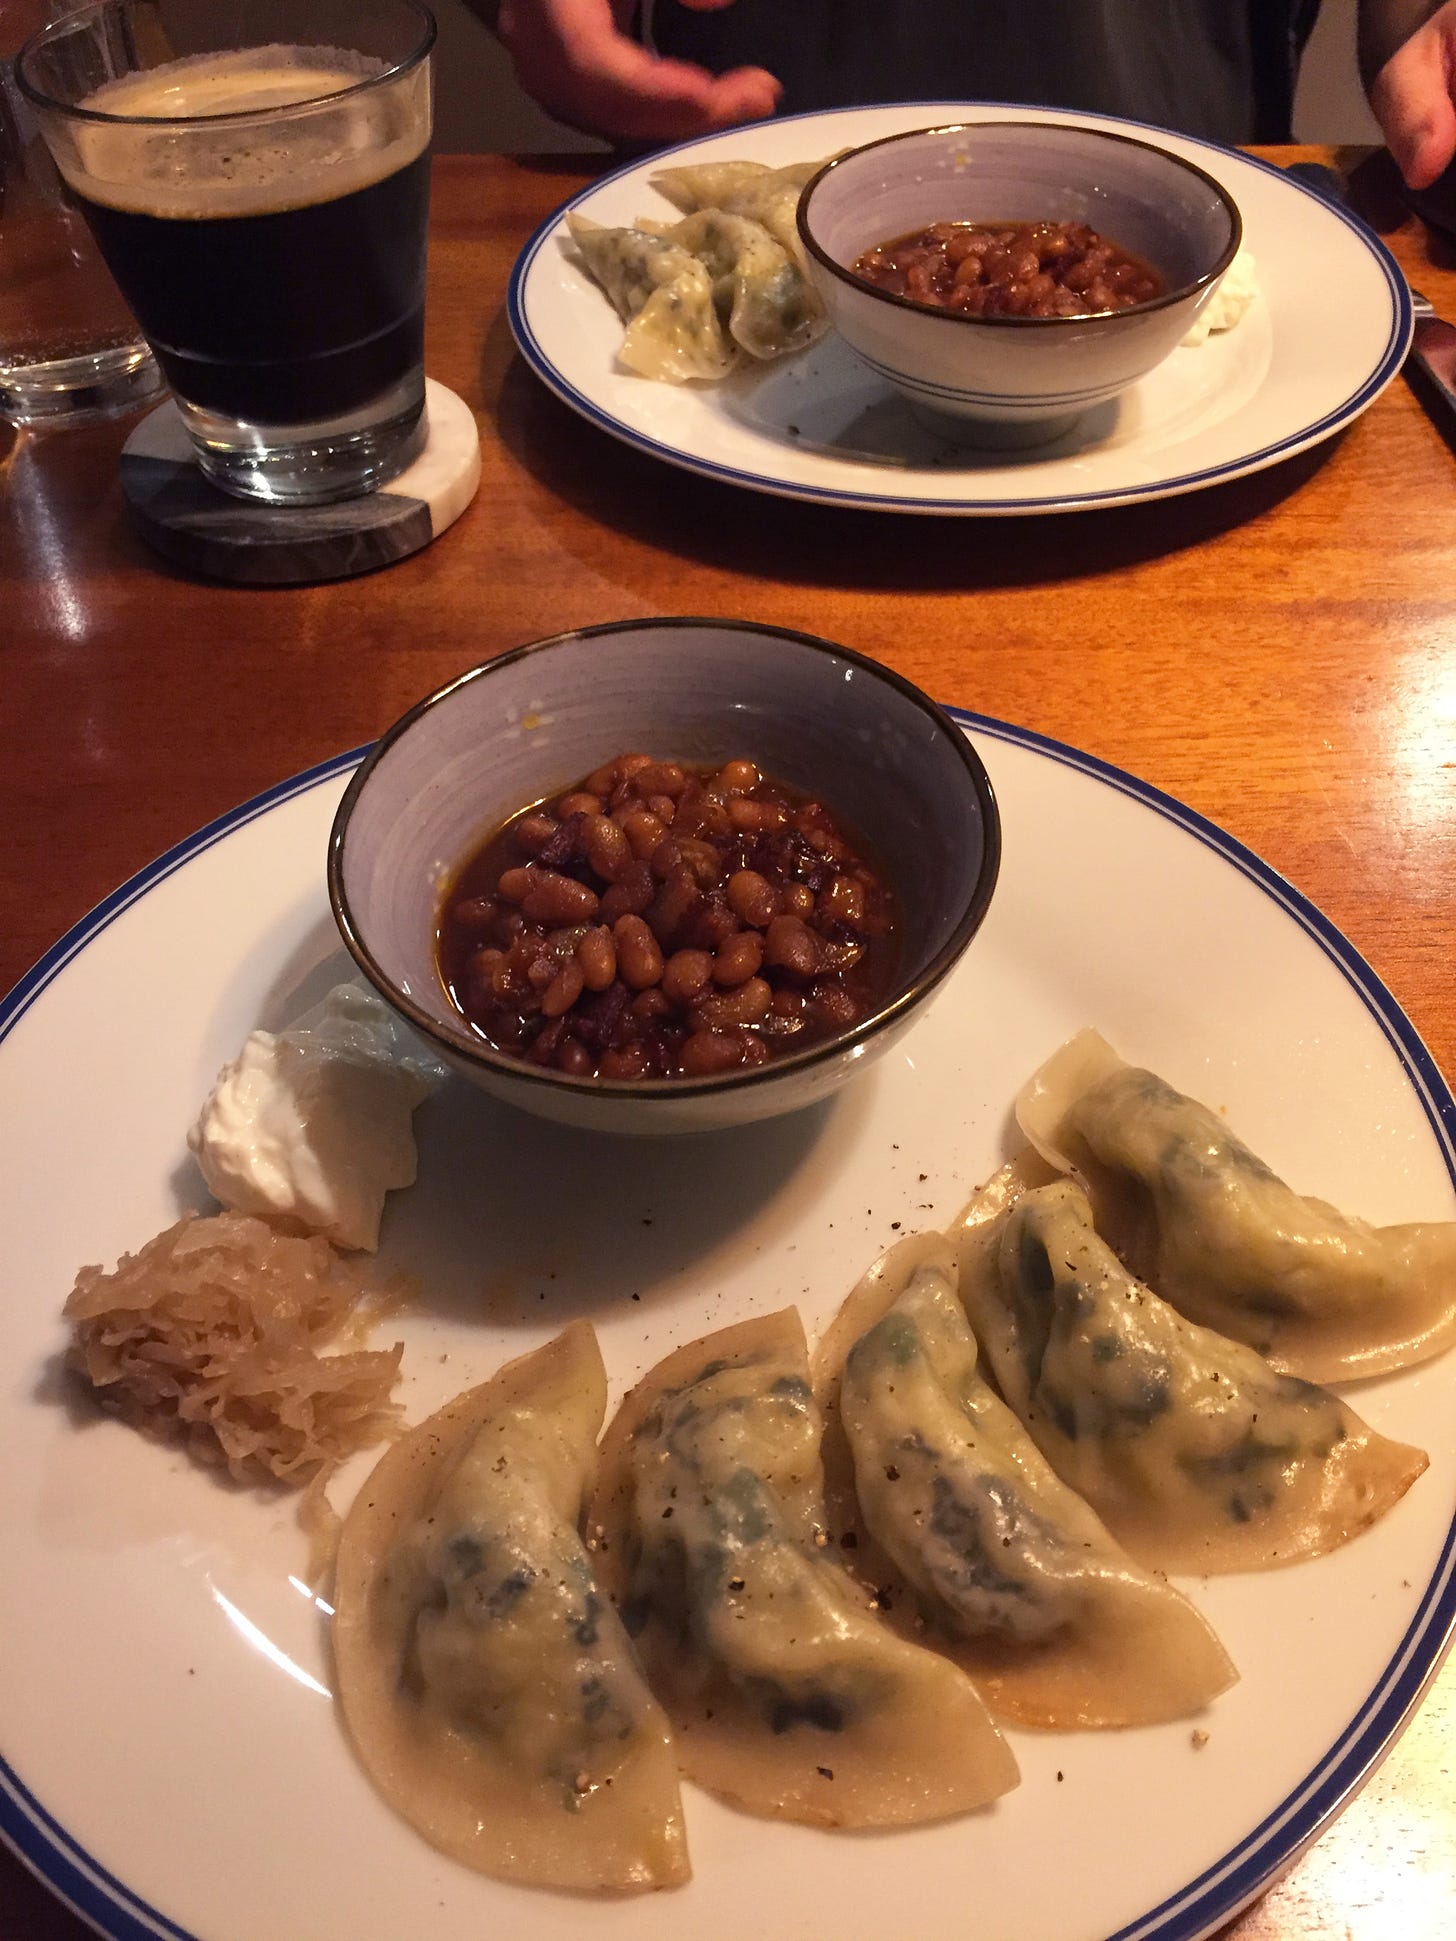 Two large plates with an arrangement of 5 pierogis each and a small amount of sour cream and sauerkraut, with a small purple bowl filled with baked beans. A glass of dark beer sits on a coaster next to the plate in the background.